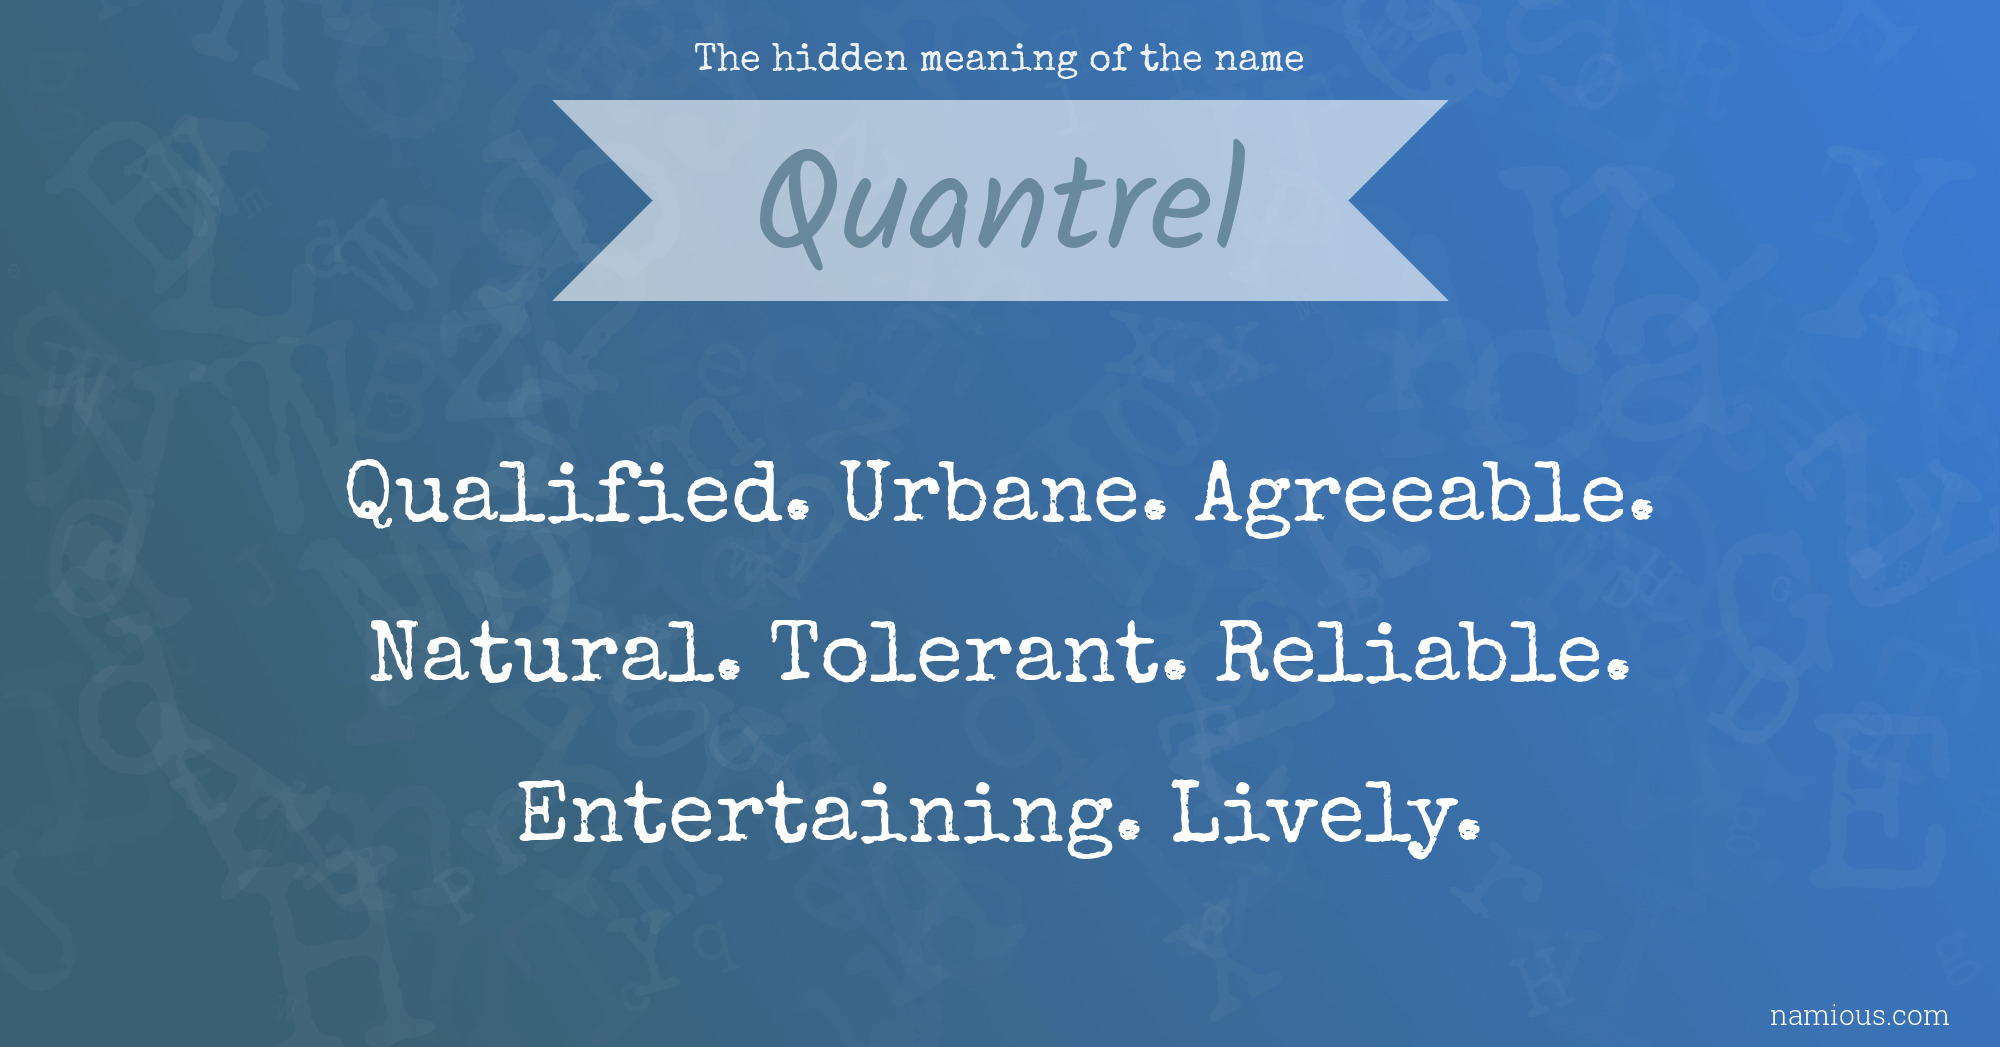 The hidden meaning of the name Quantrel